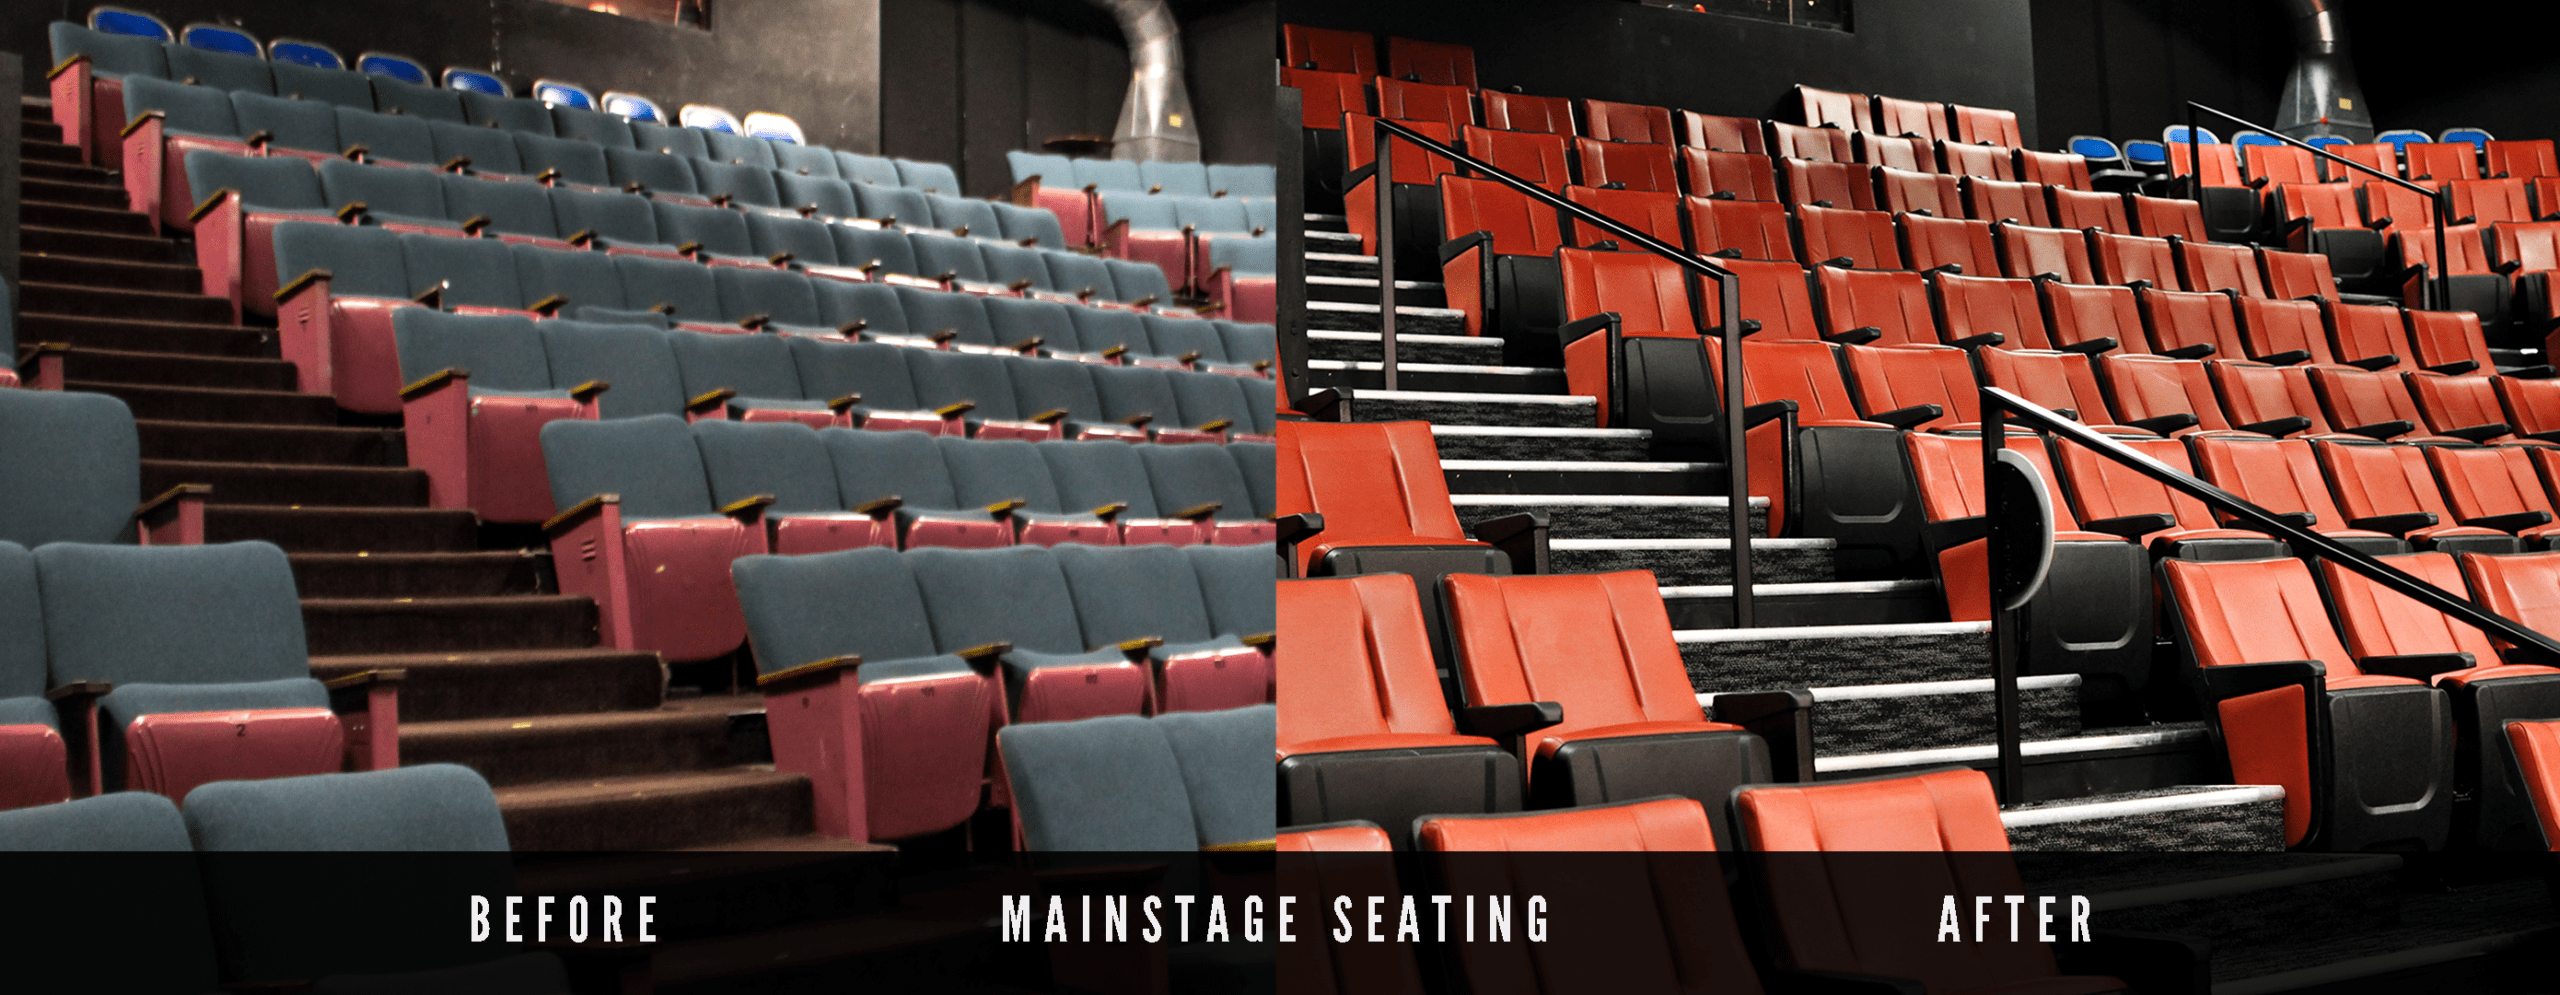 Mainstage seating before and after